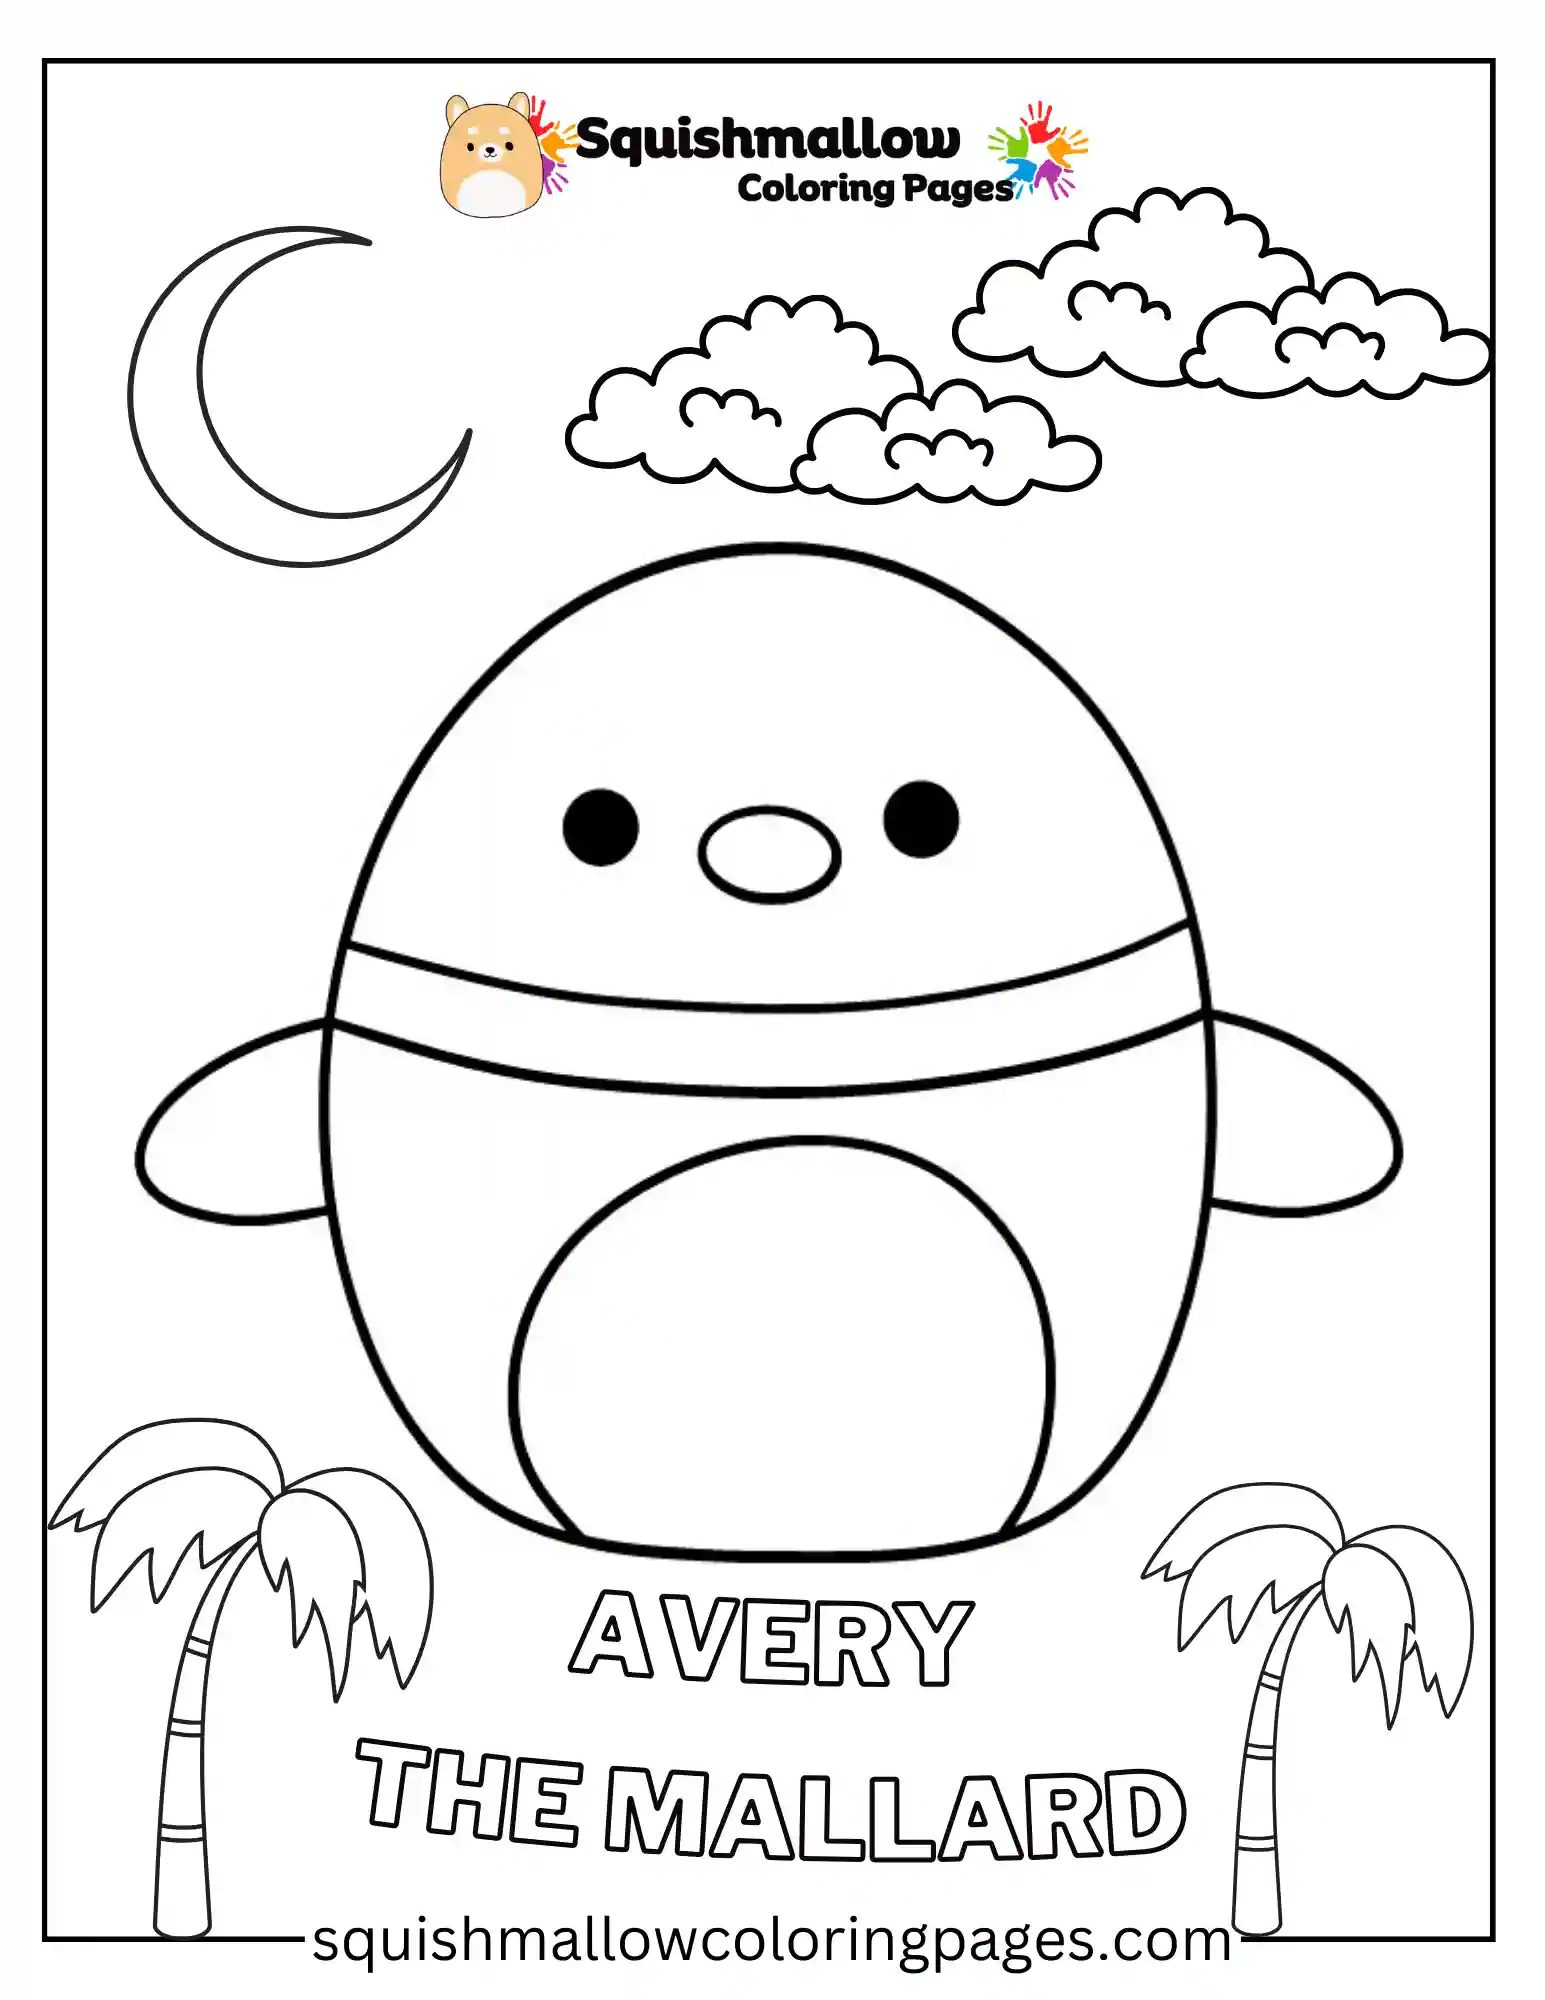 Avery The Mallard Squishmallow Coloring Pages